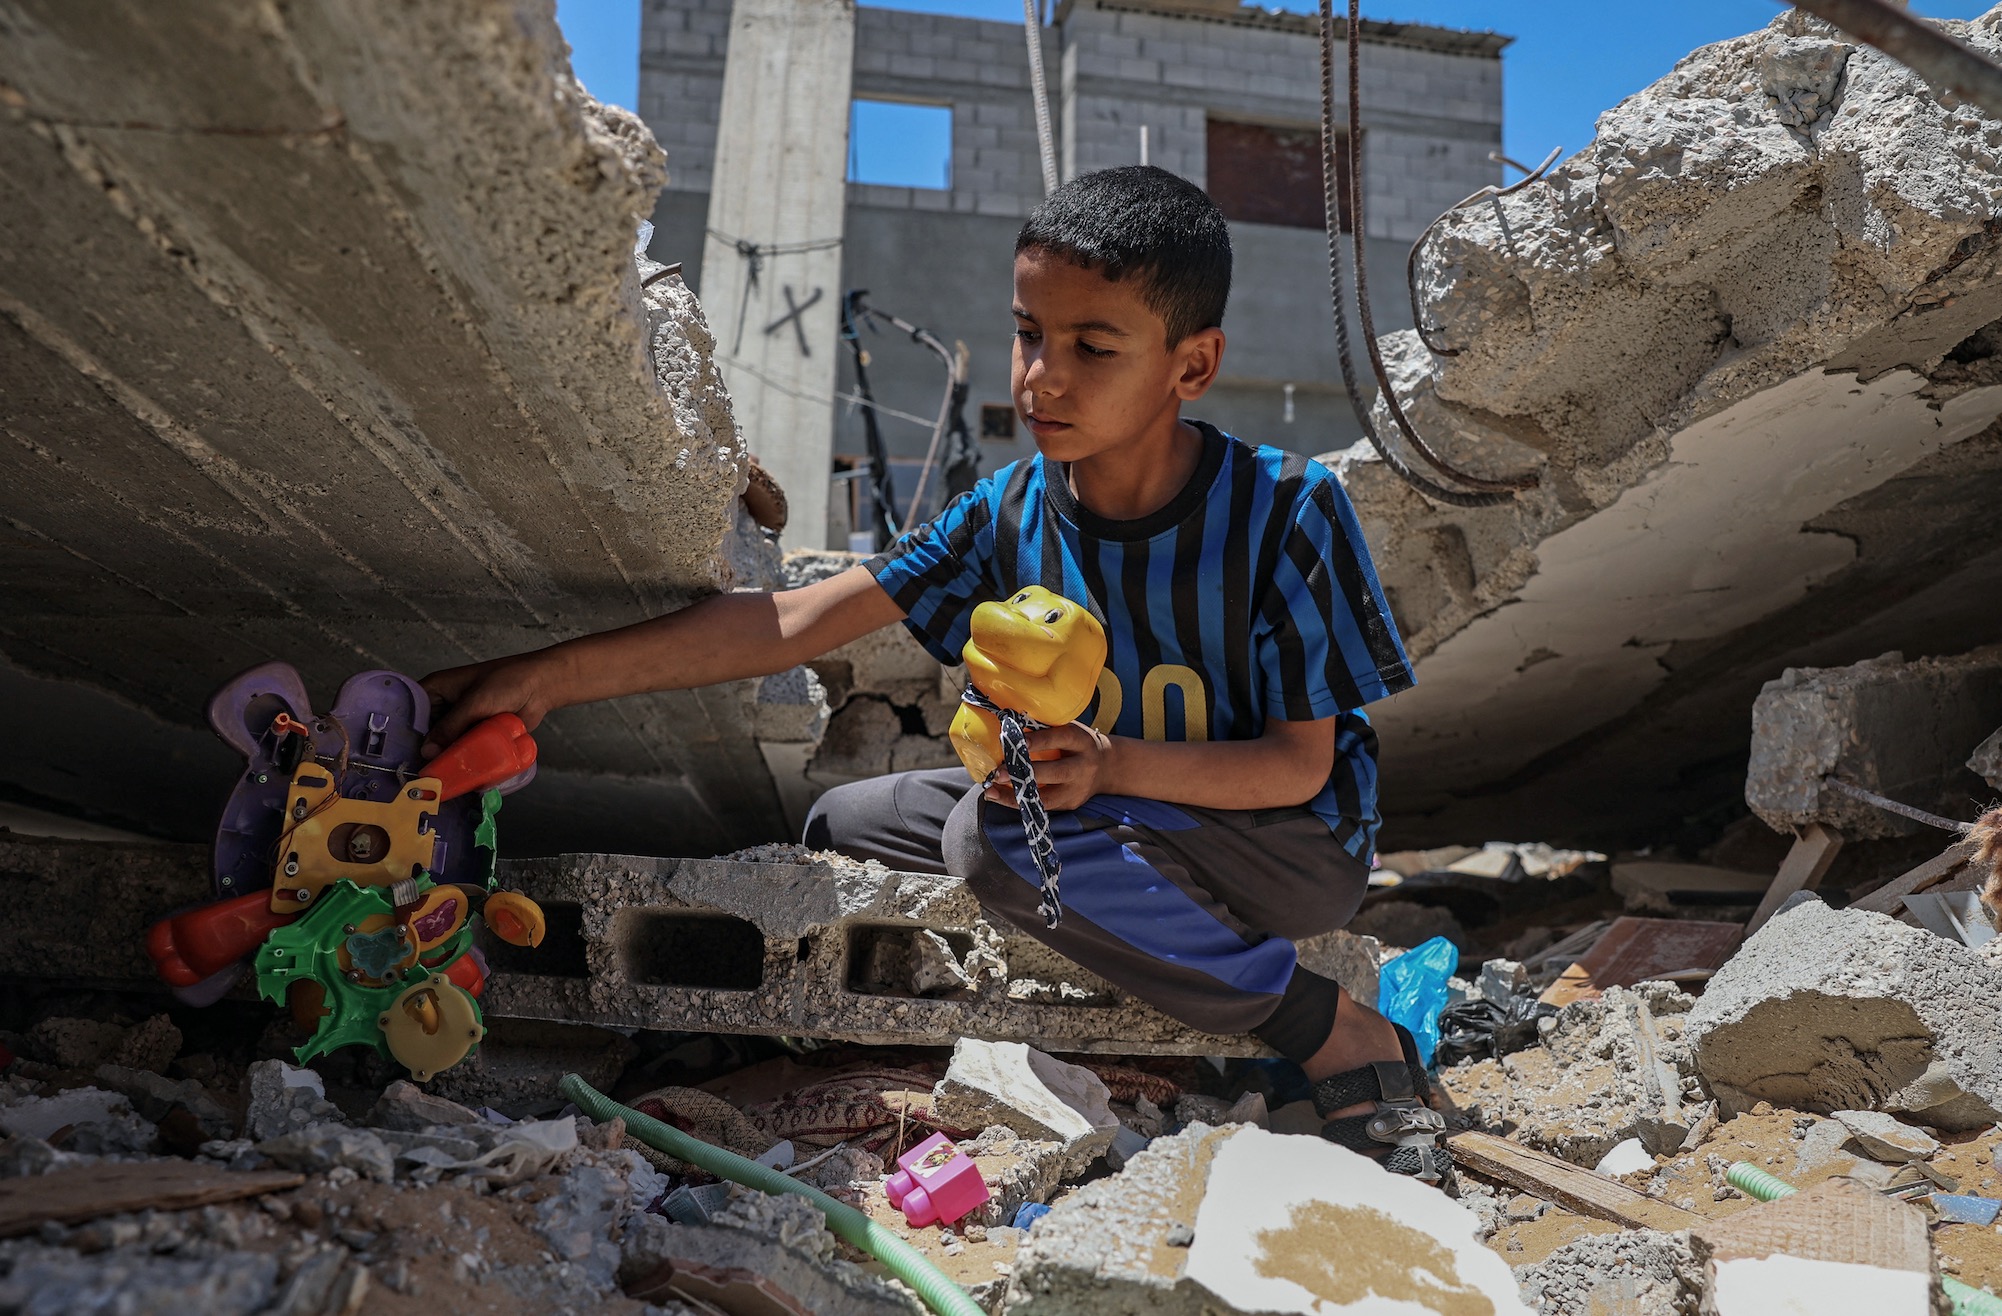 Boy in Gaza playing with toys.